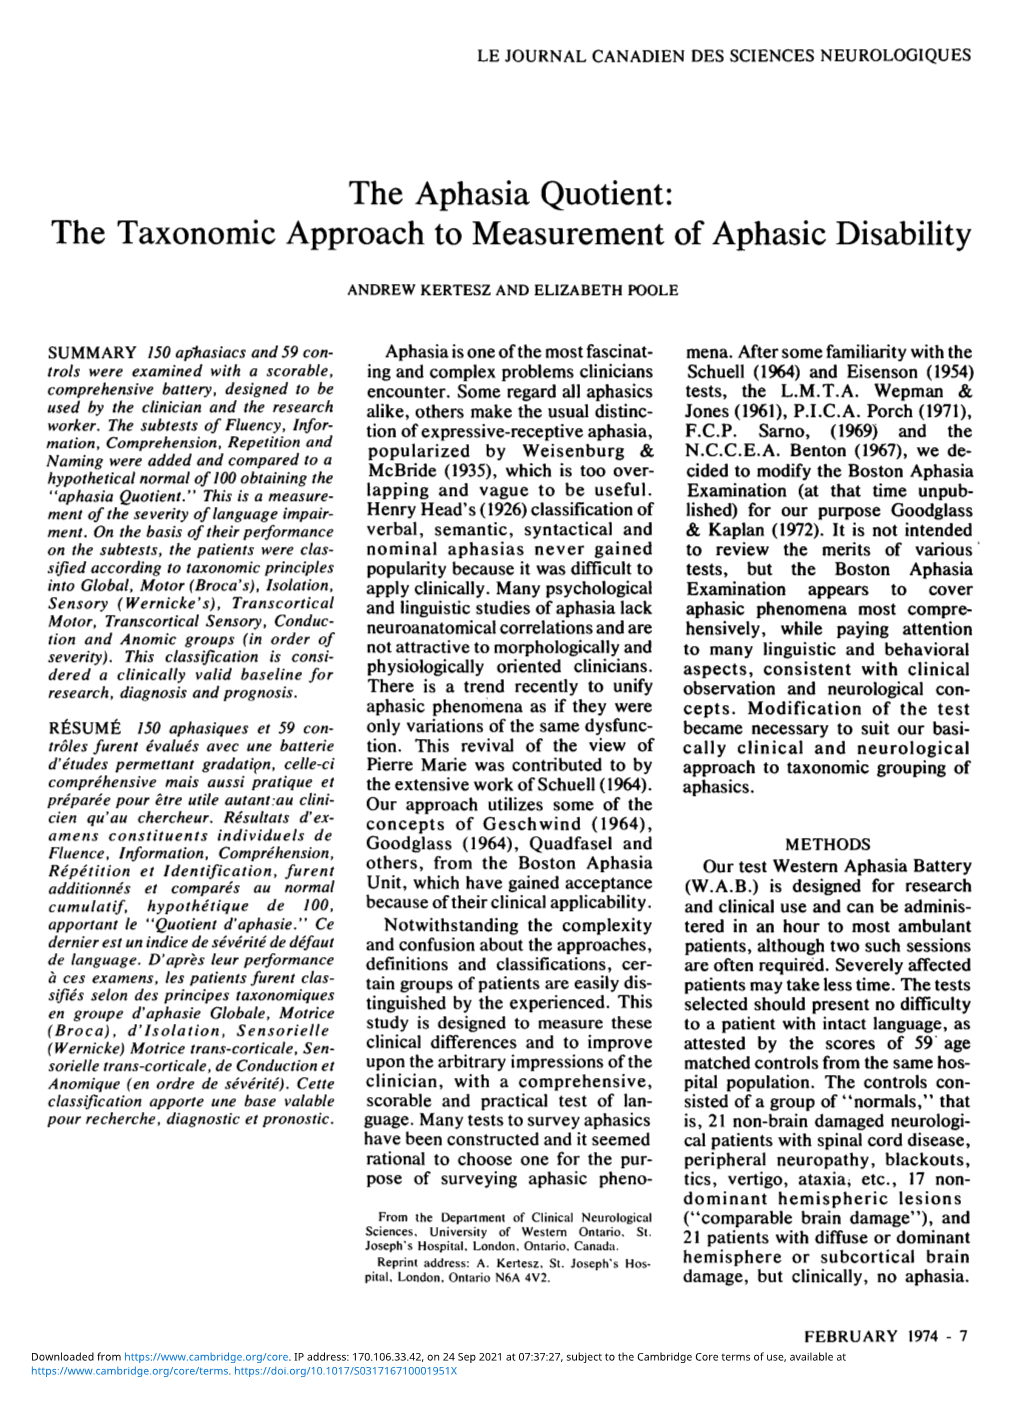 The Aphasia Quotient: the Taxonomic Approach to Measurement of Aphasic Disability